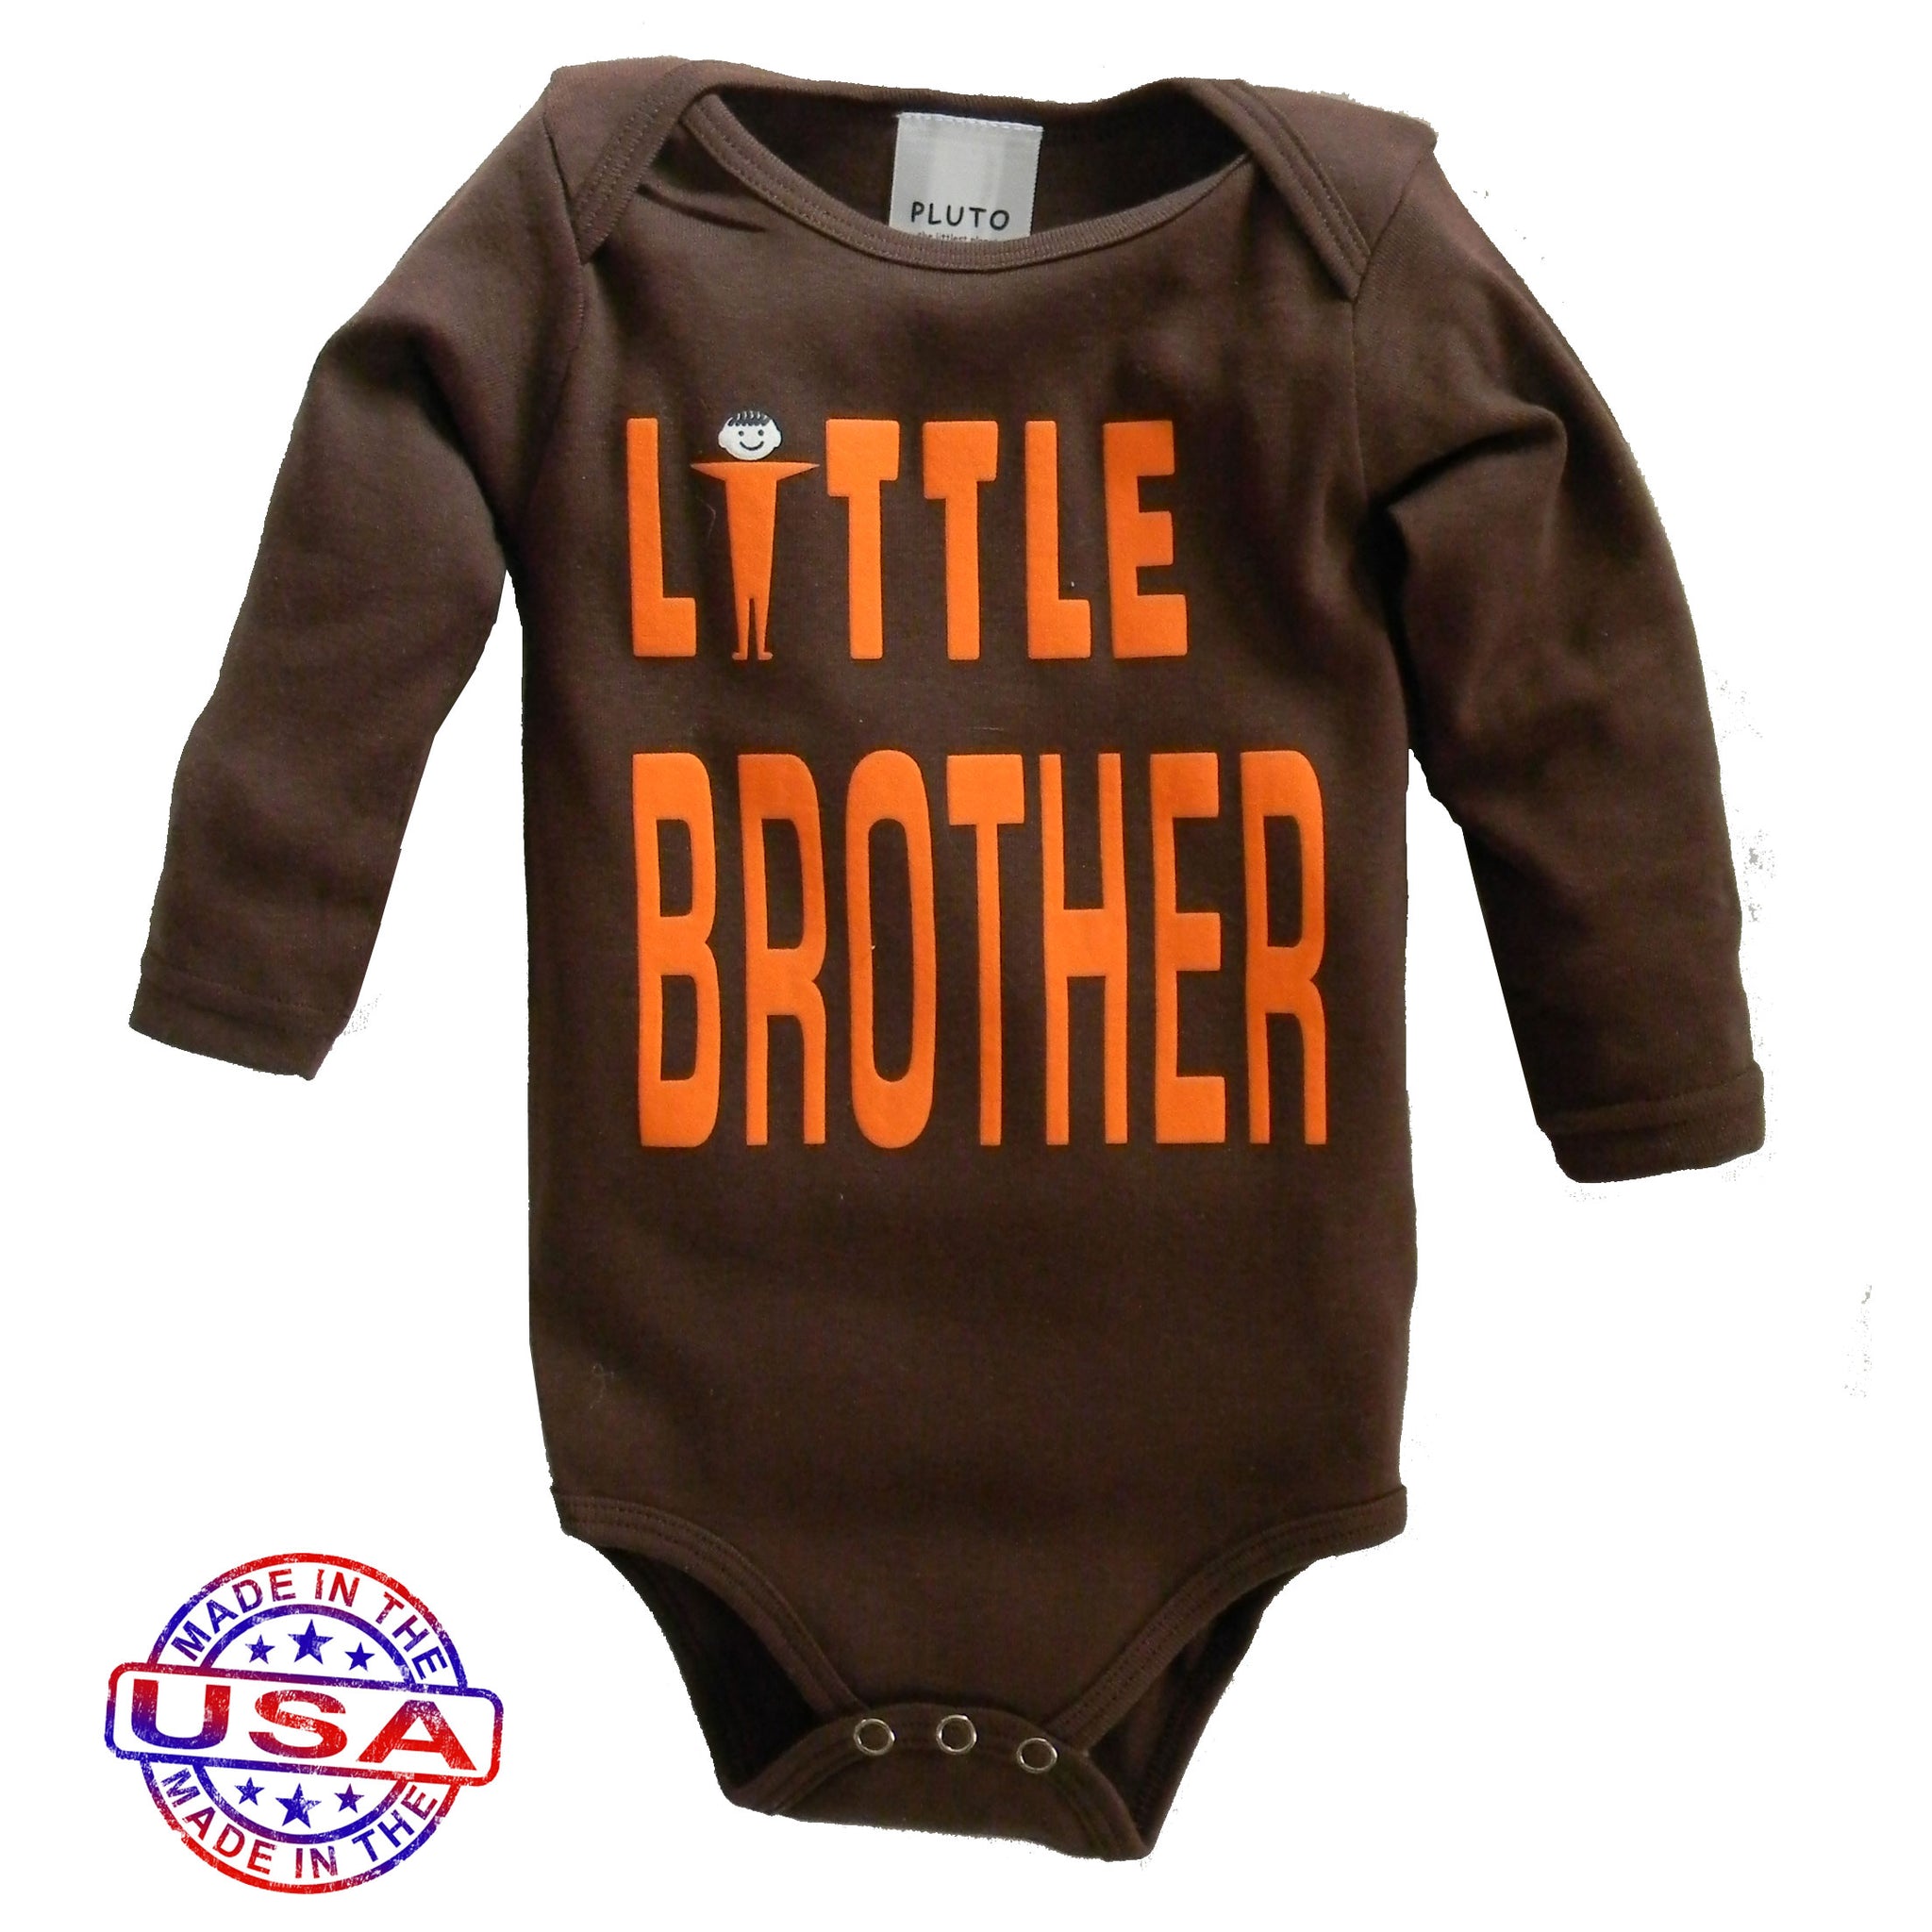 Boys' Little Brother Brown One Piece by Pluto